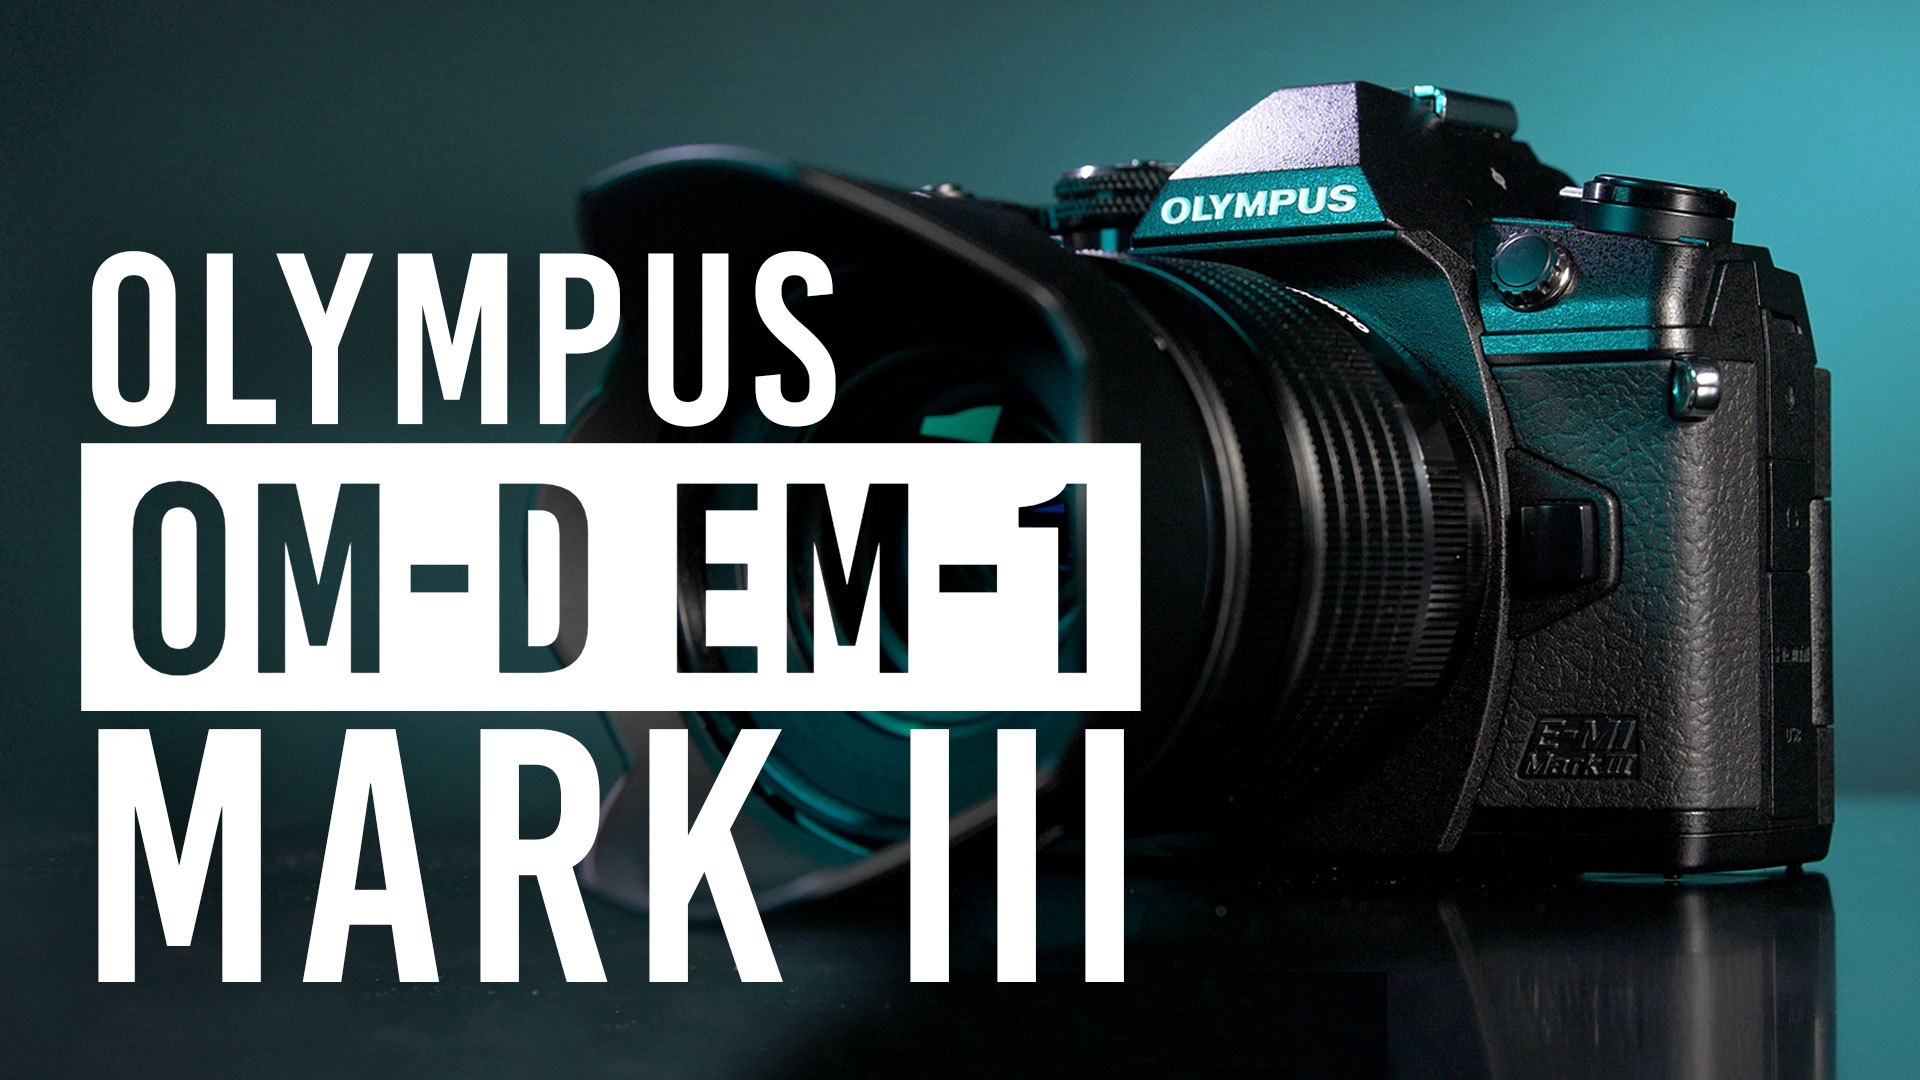 Olympus Announces The Om D E M1 Mark Iii And Pen E Pl10 Mirrorless Cameras And 12 45mm Pro Lens More Information At B H Business Wire